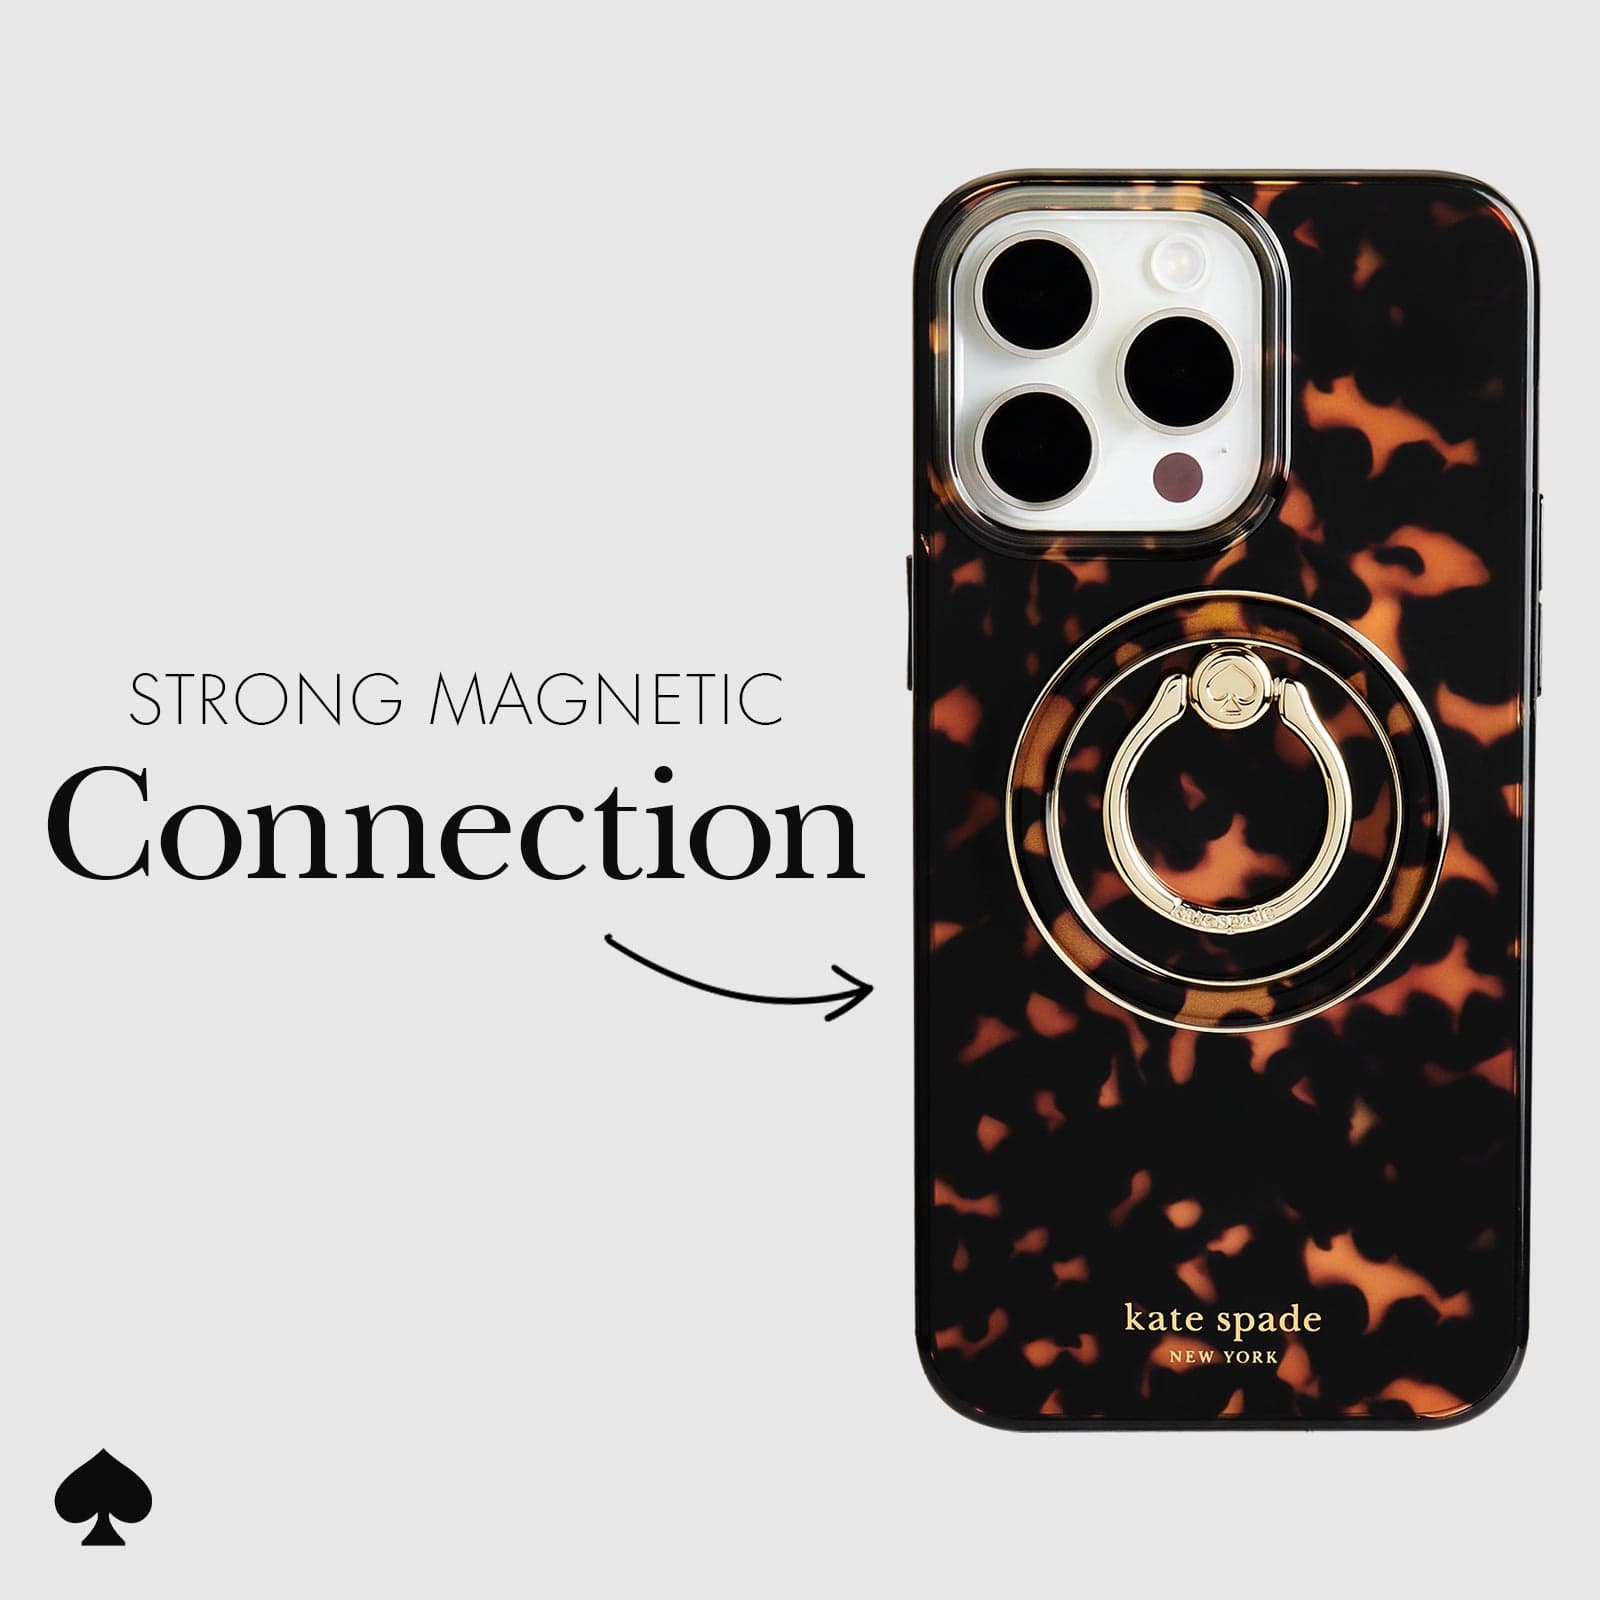 STRONG MAGNETIC CONNECTION